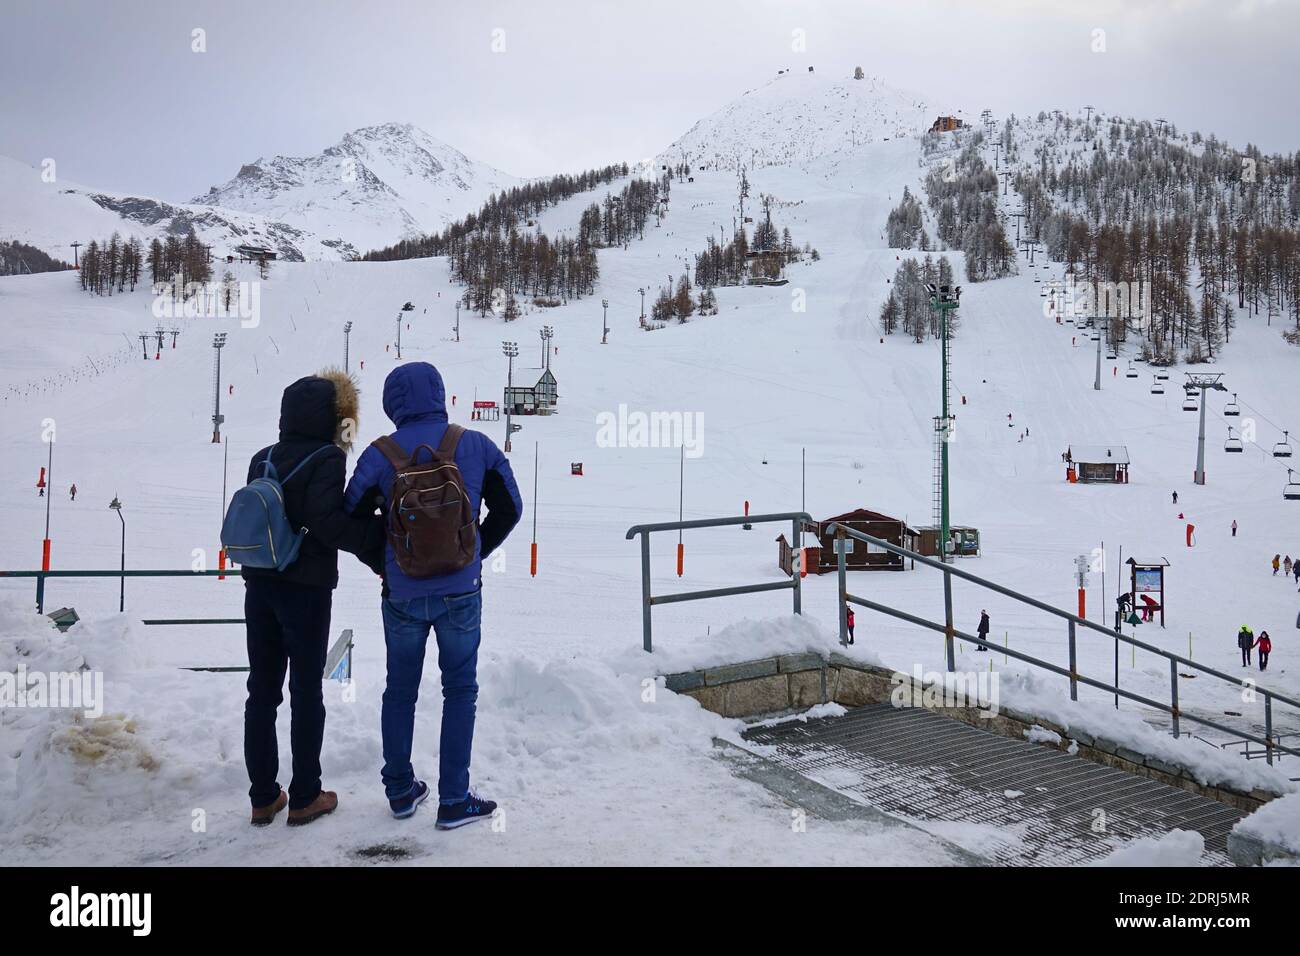 Ski slopes closed due to pandemic over Christmas, couple looks at desolately empty slopes. Sestriere, Italy - December 2020 Stock Photo